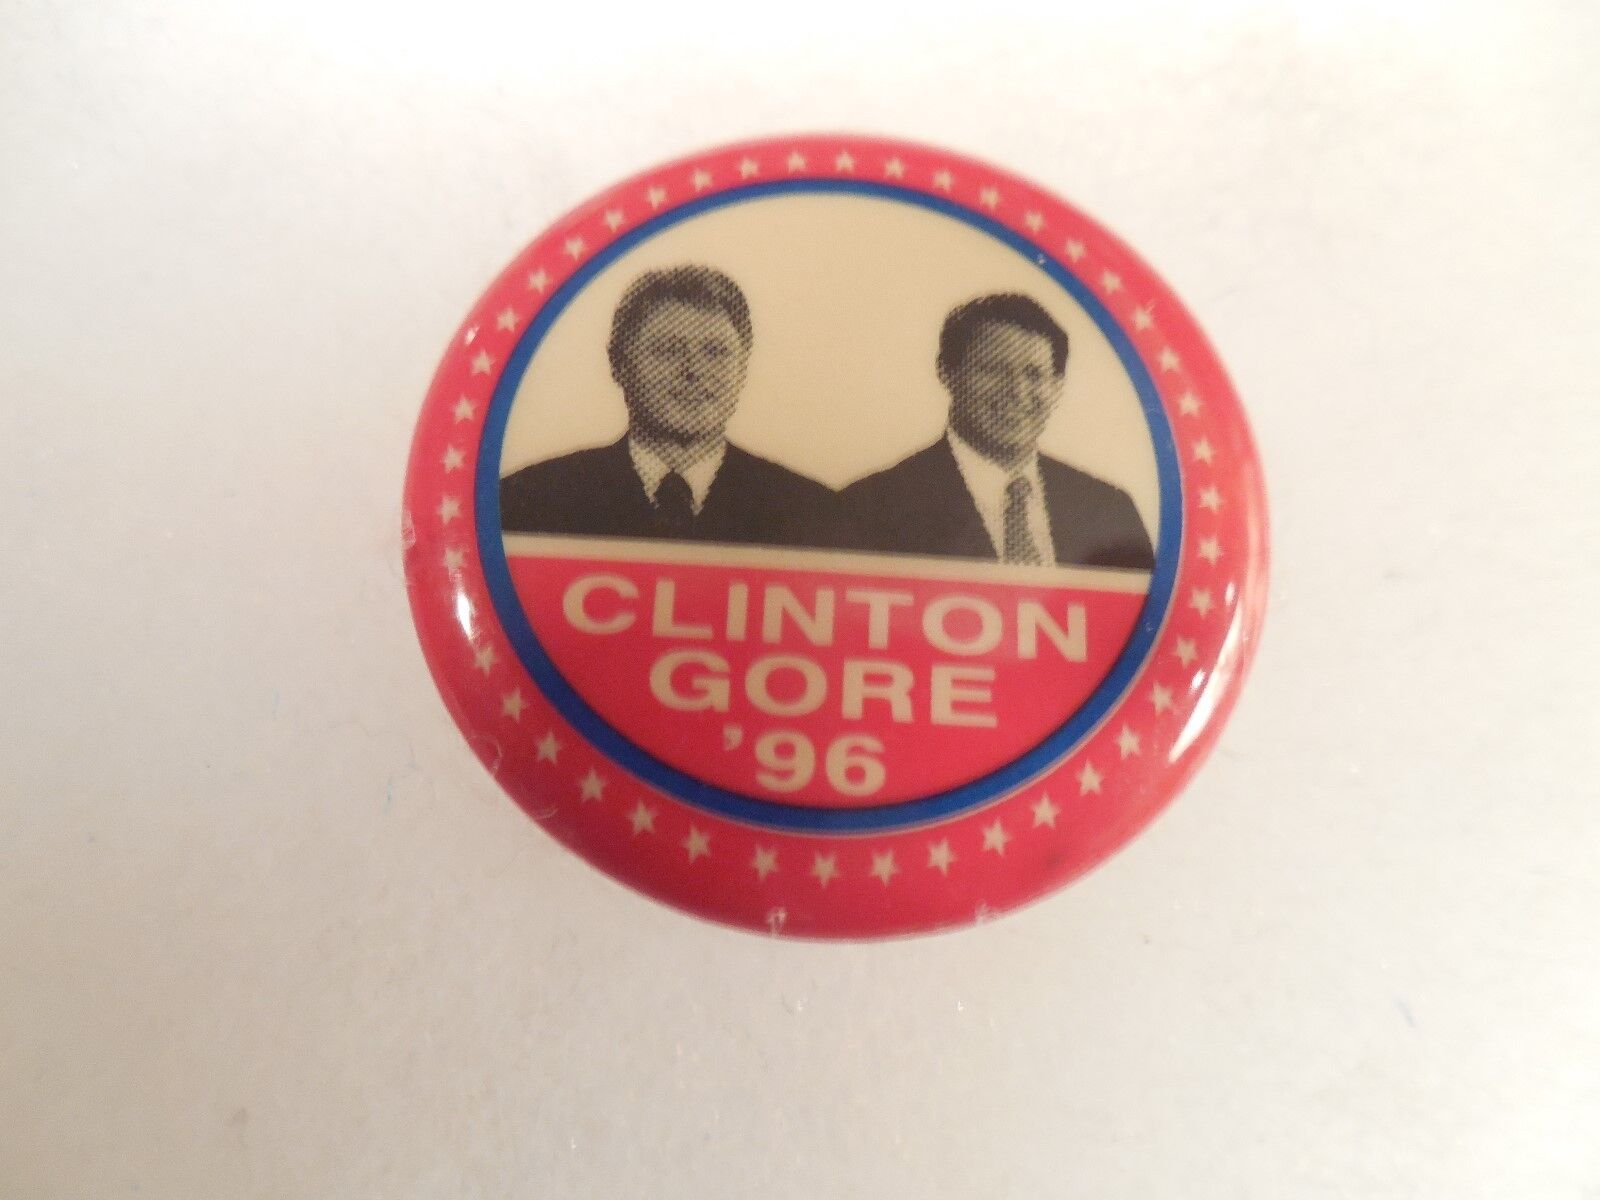 Presidential Bill Clinton Pin Back Campaign Button Gore 1996 President Candidate